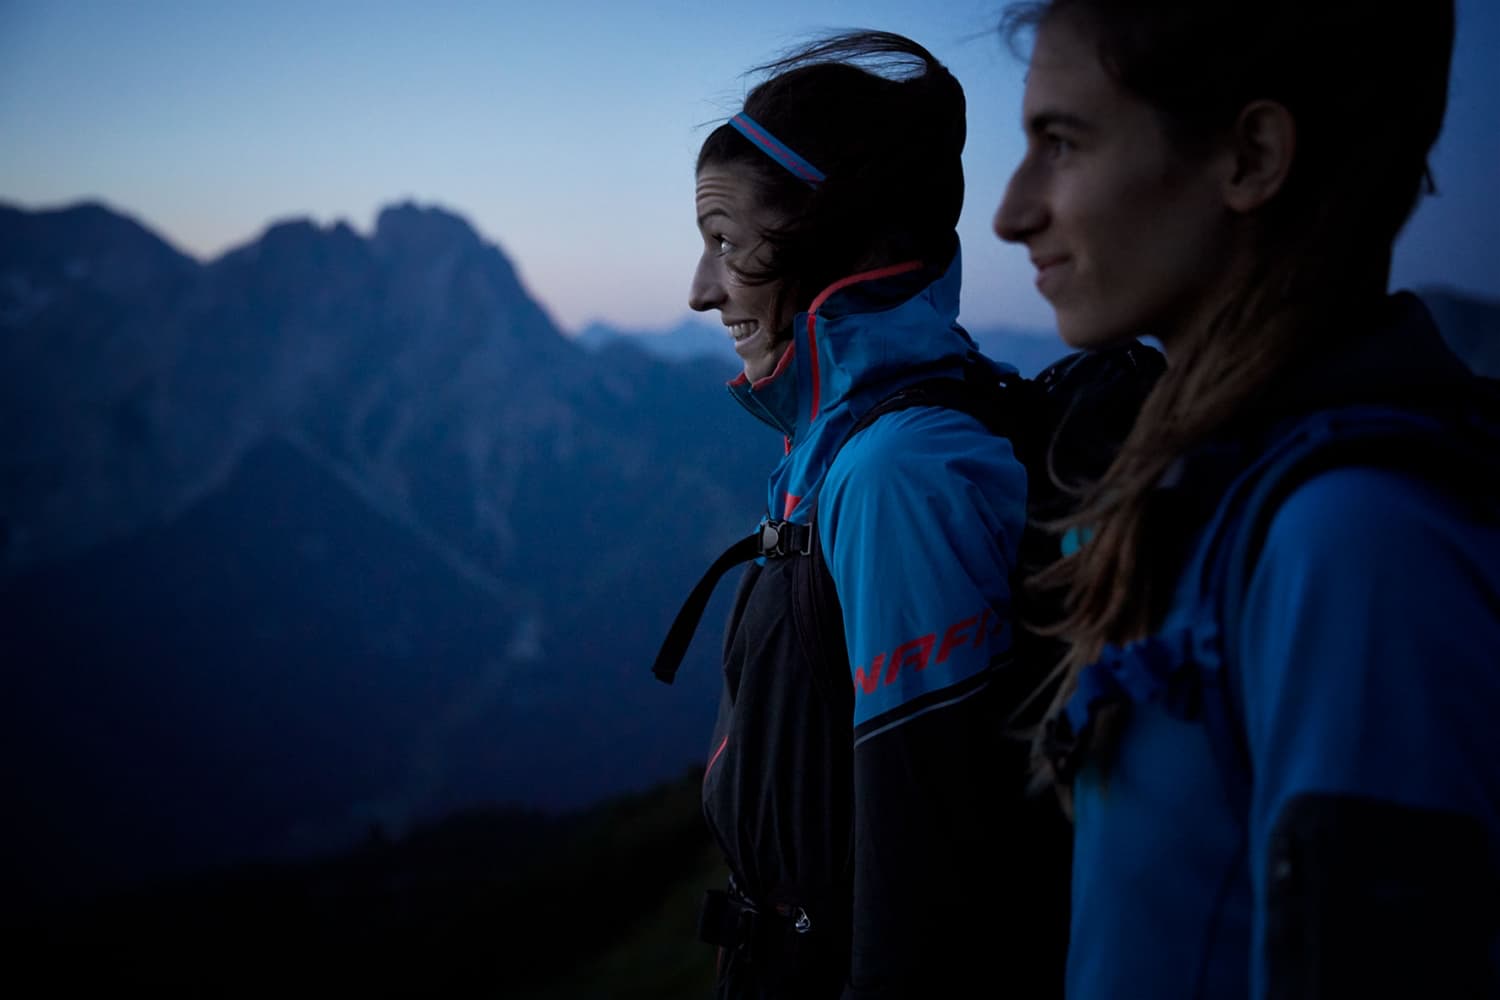 Two women excited to climb the mountain in the dark to get to the summit at sunrise